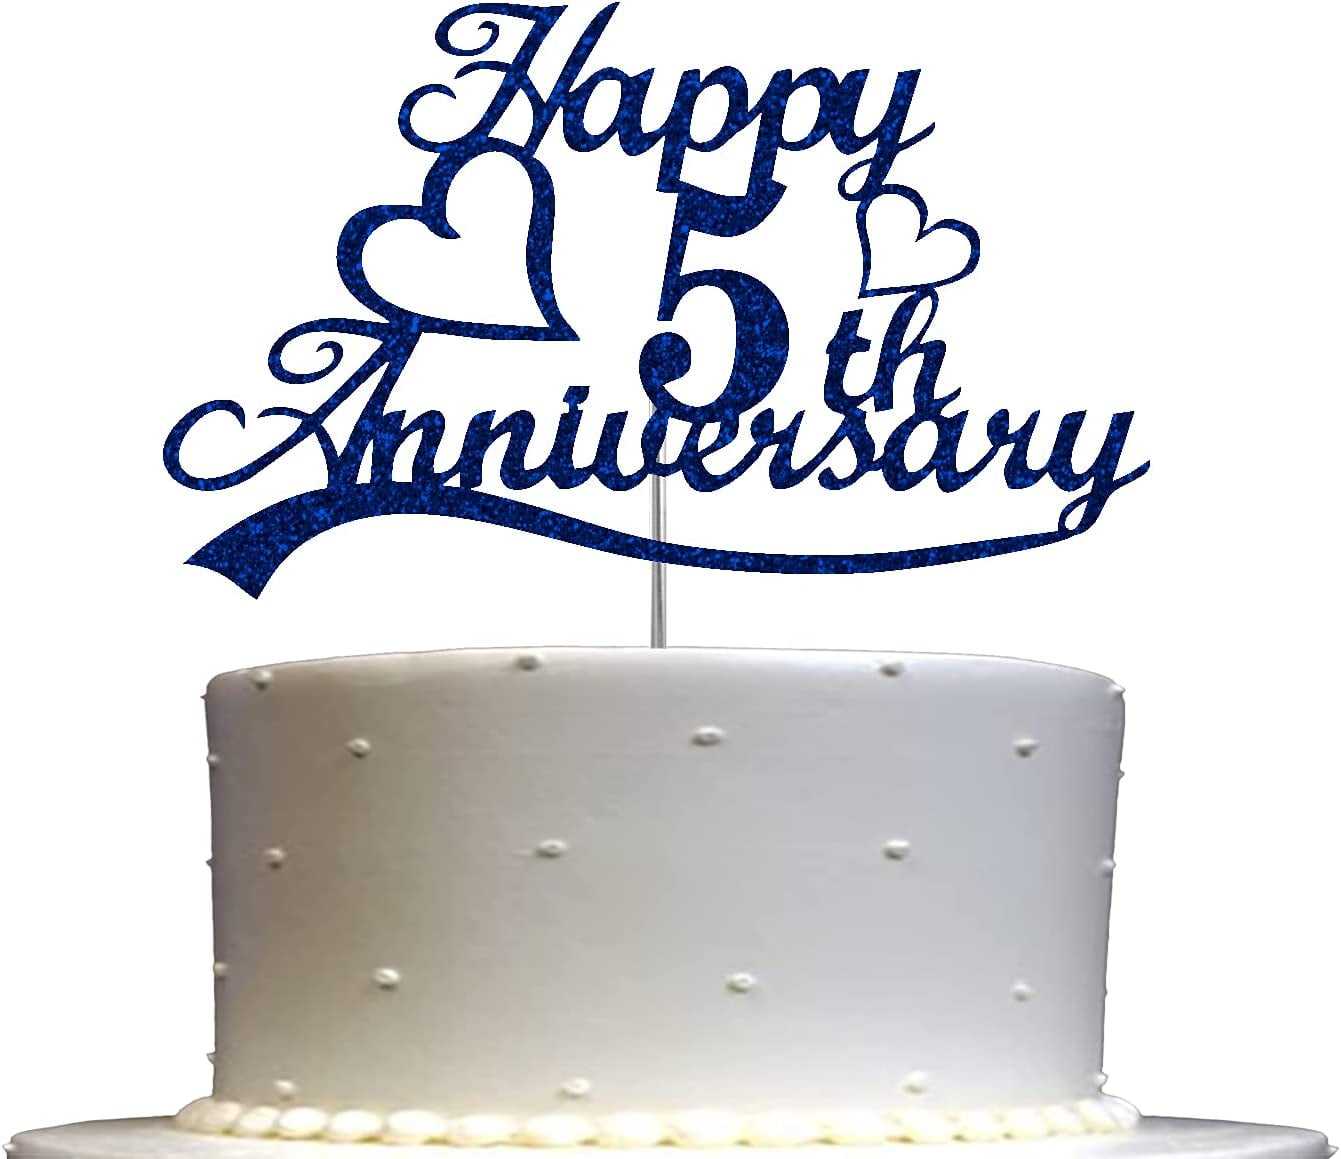 Cakes On Top - Happy 5th anniversary cake! #cakesontop #eloracakes  #ridgetechautomation | Facebook